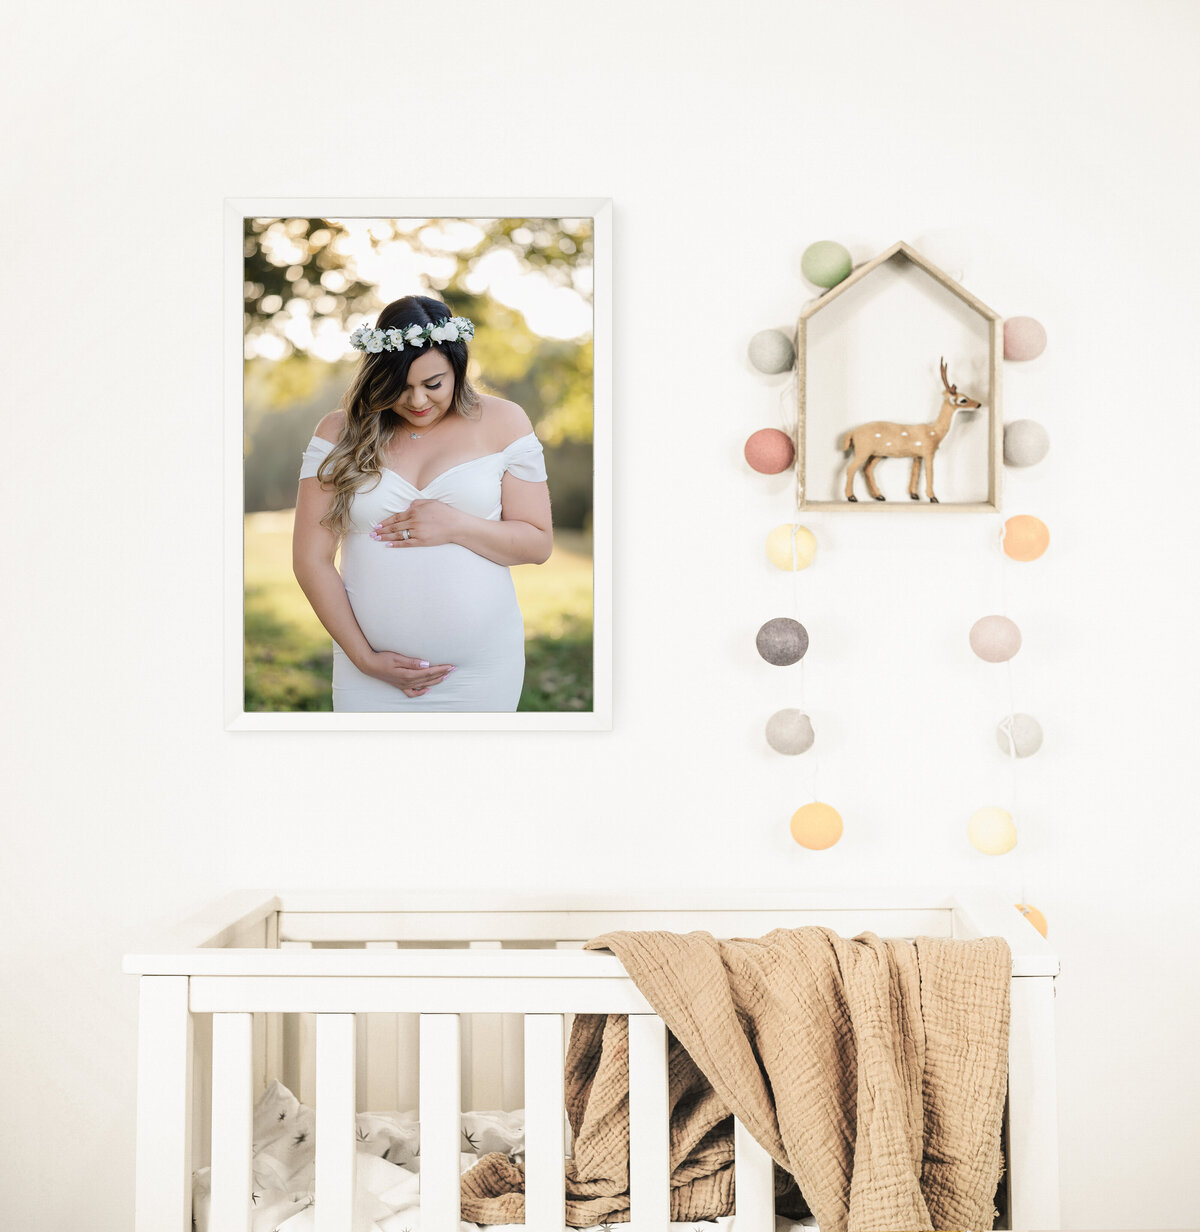 Expecting mother wearing a white dress and flower crown gazes at her belly. Maternity photos by Amanda Touchstone